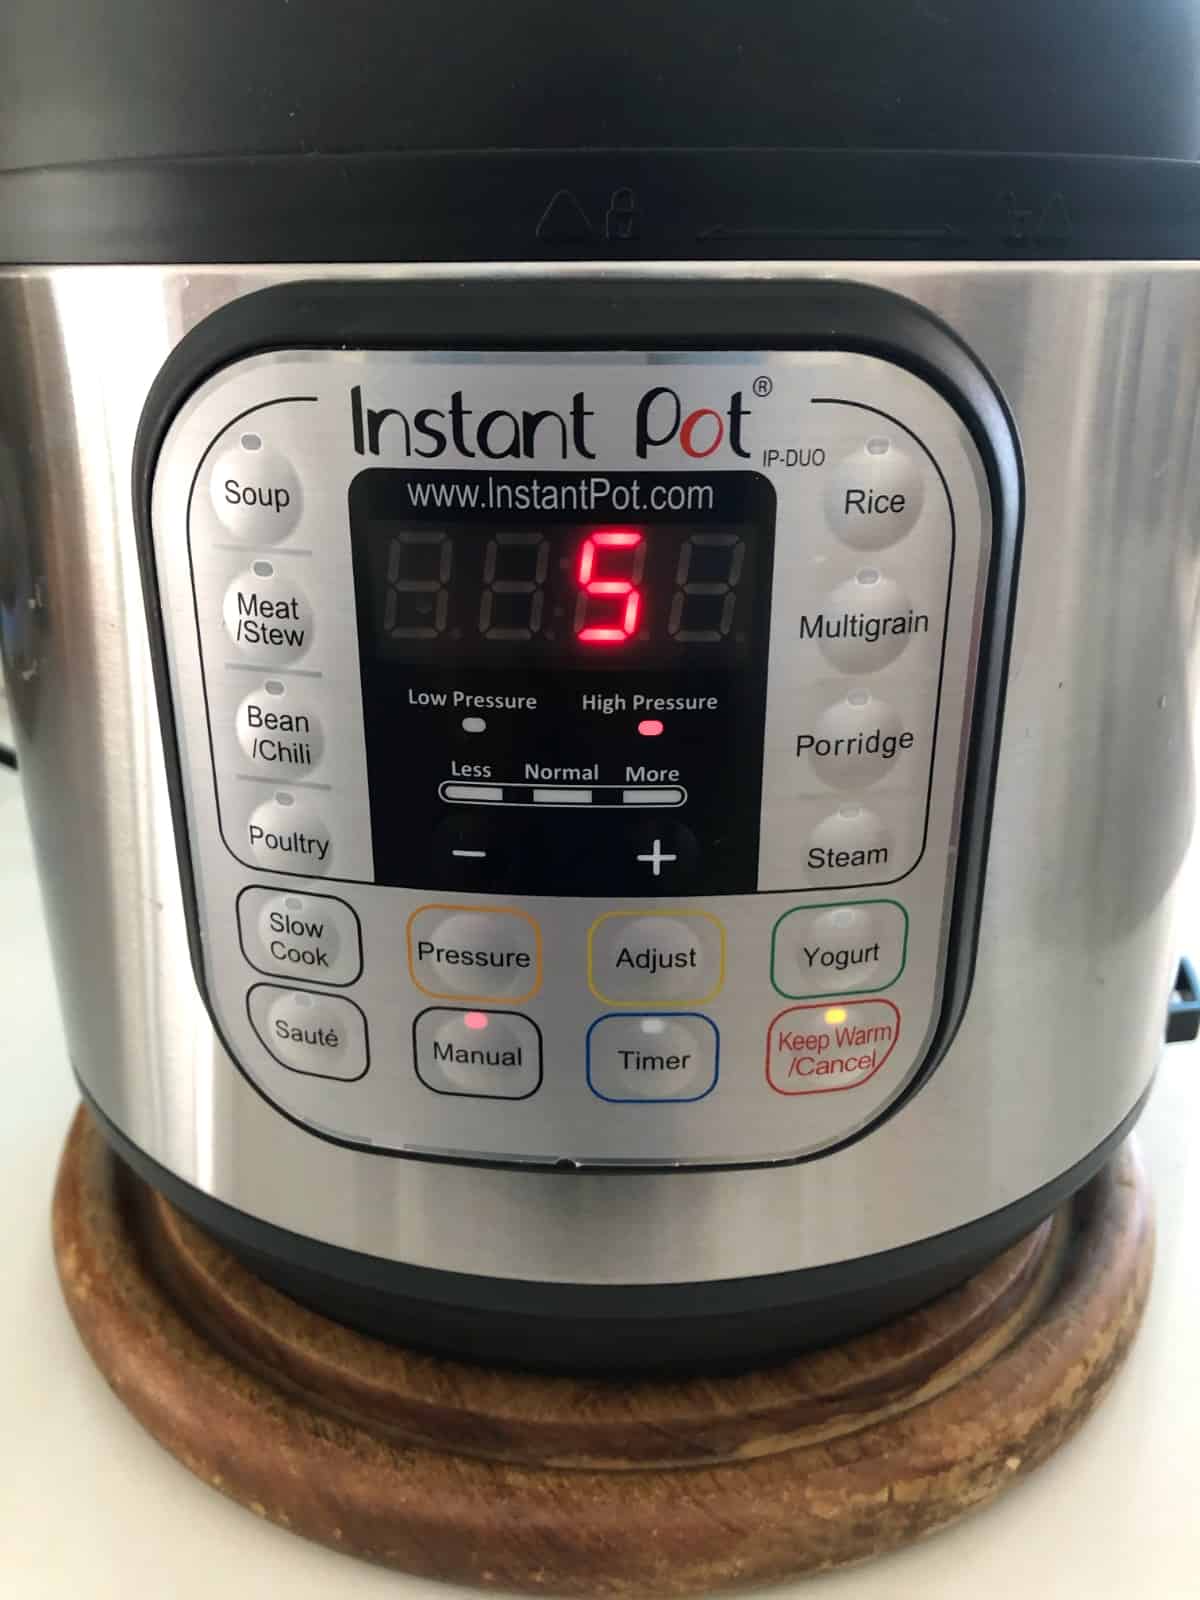 InstantPot set to 5 minutes on HIGH pressure